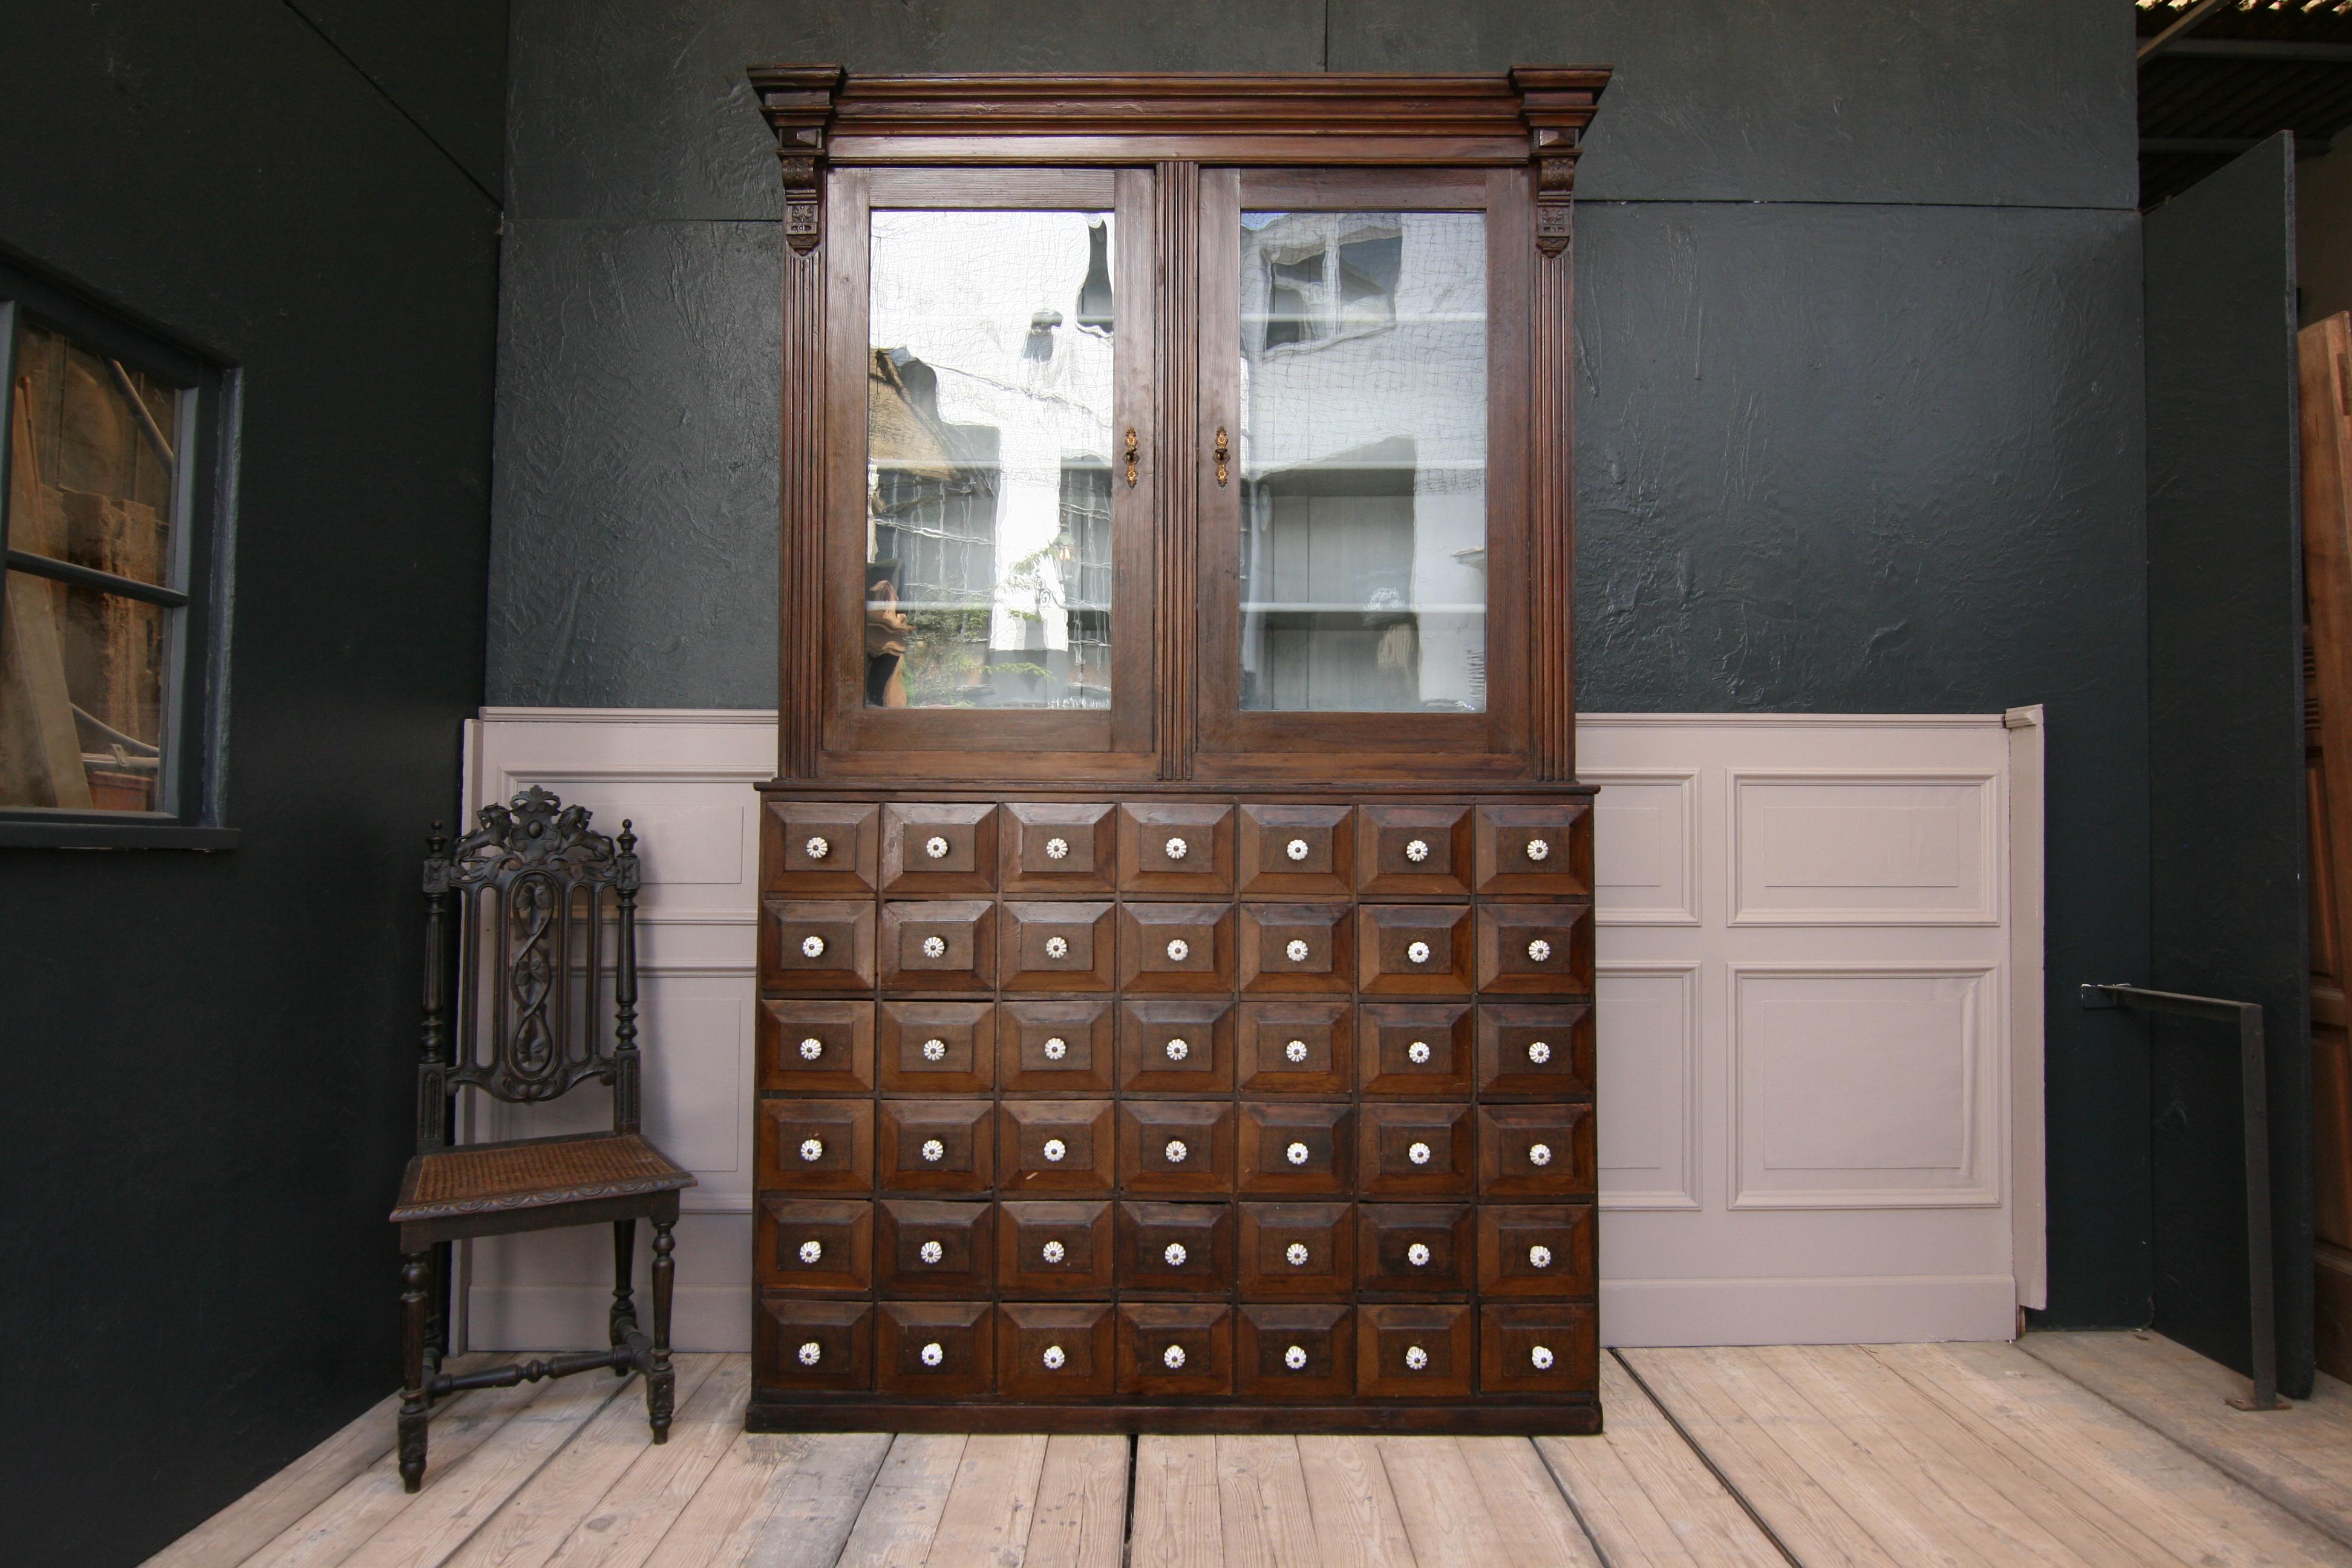 A 19th century German apothecary cabinet made of solid pine wood in the original paint.

2-part body consisting of a lower part (chest of drawers) with 42 drawers with porcelain buttons and a display case with 2 separately lockable doors with the